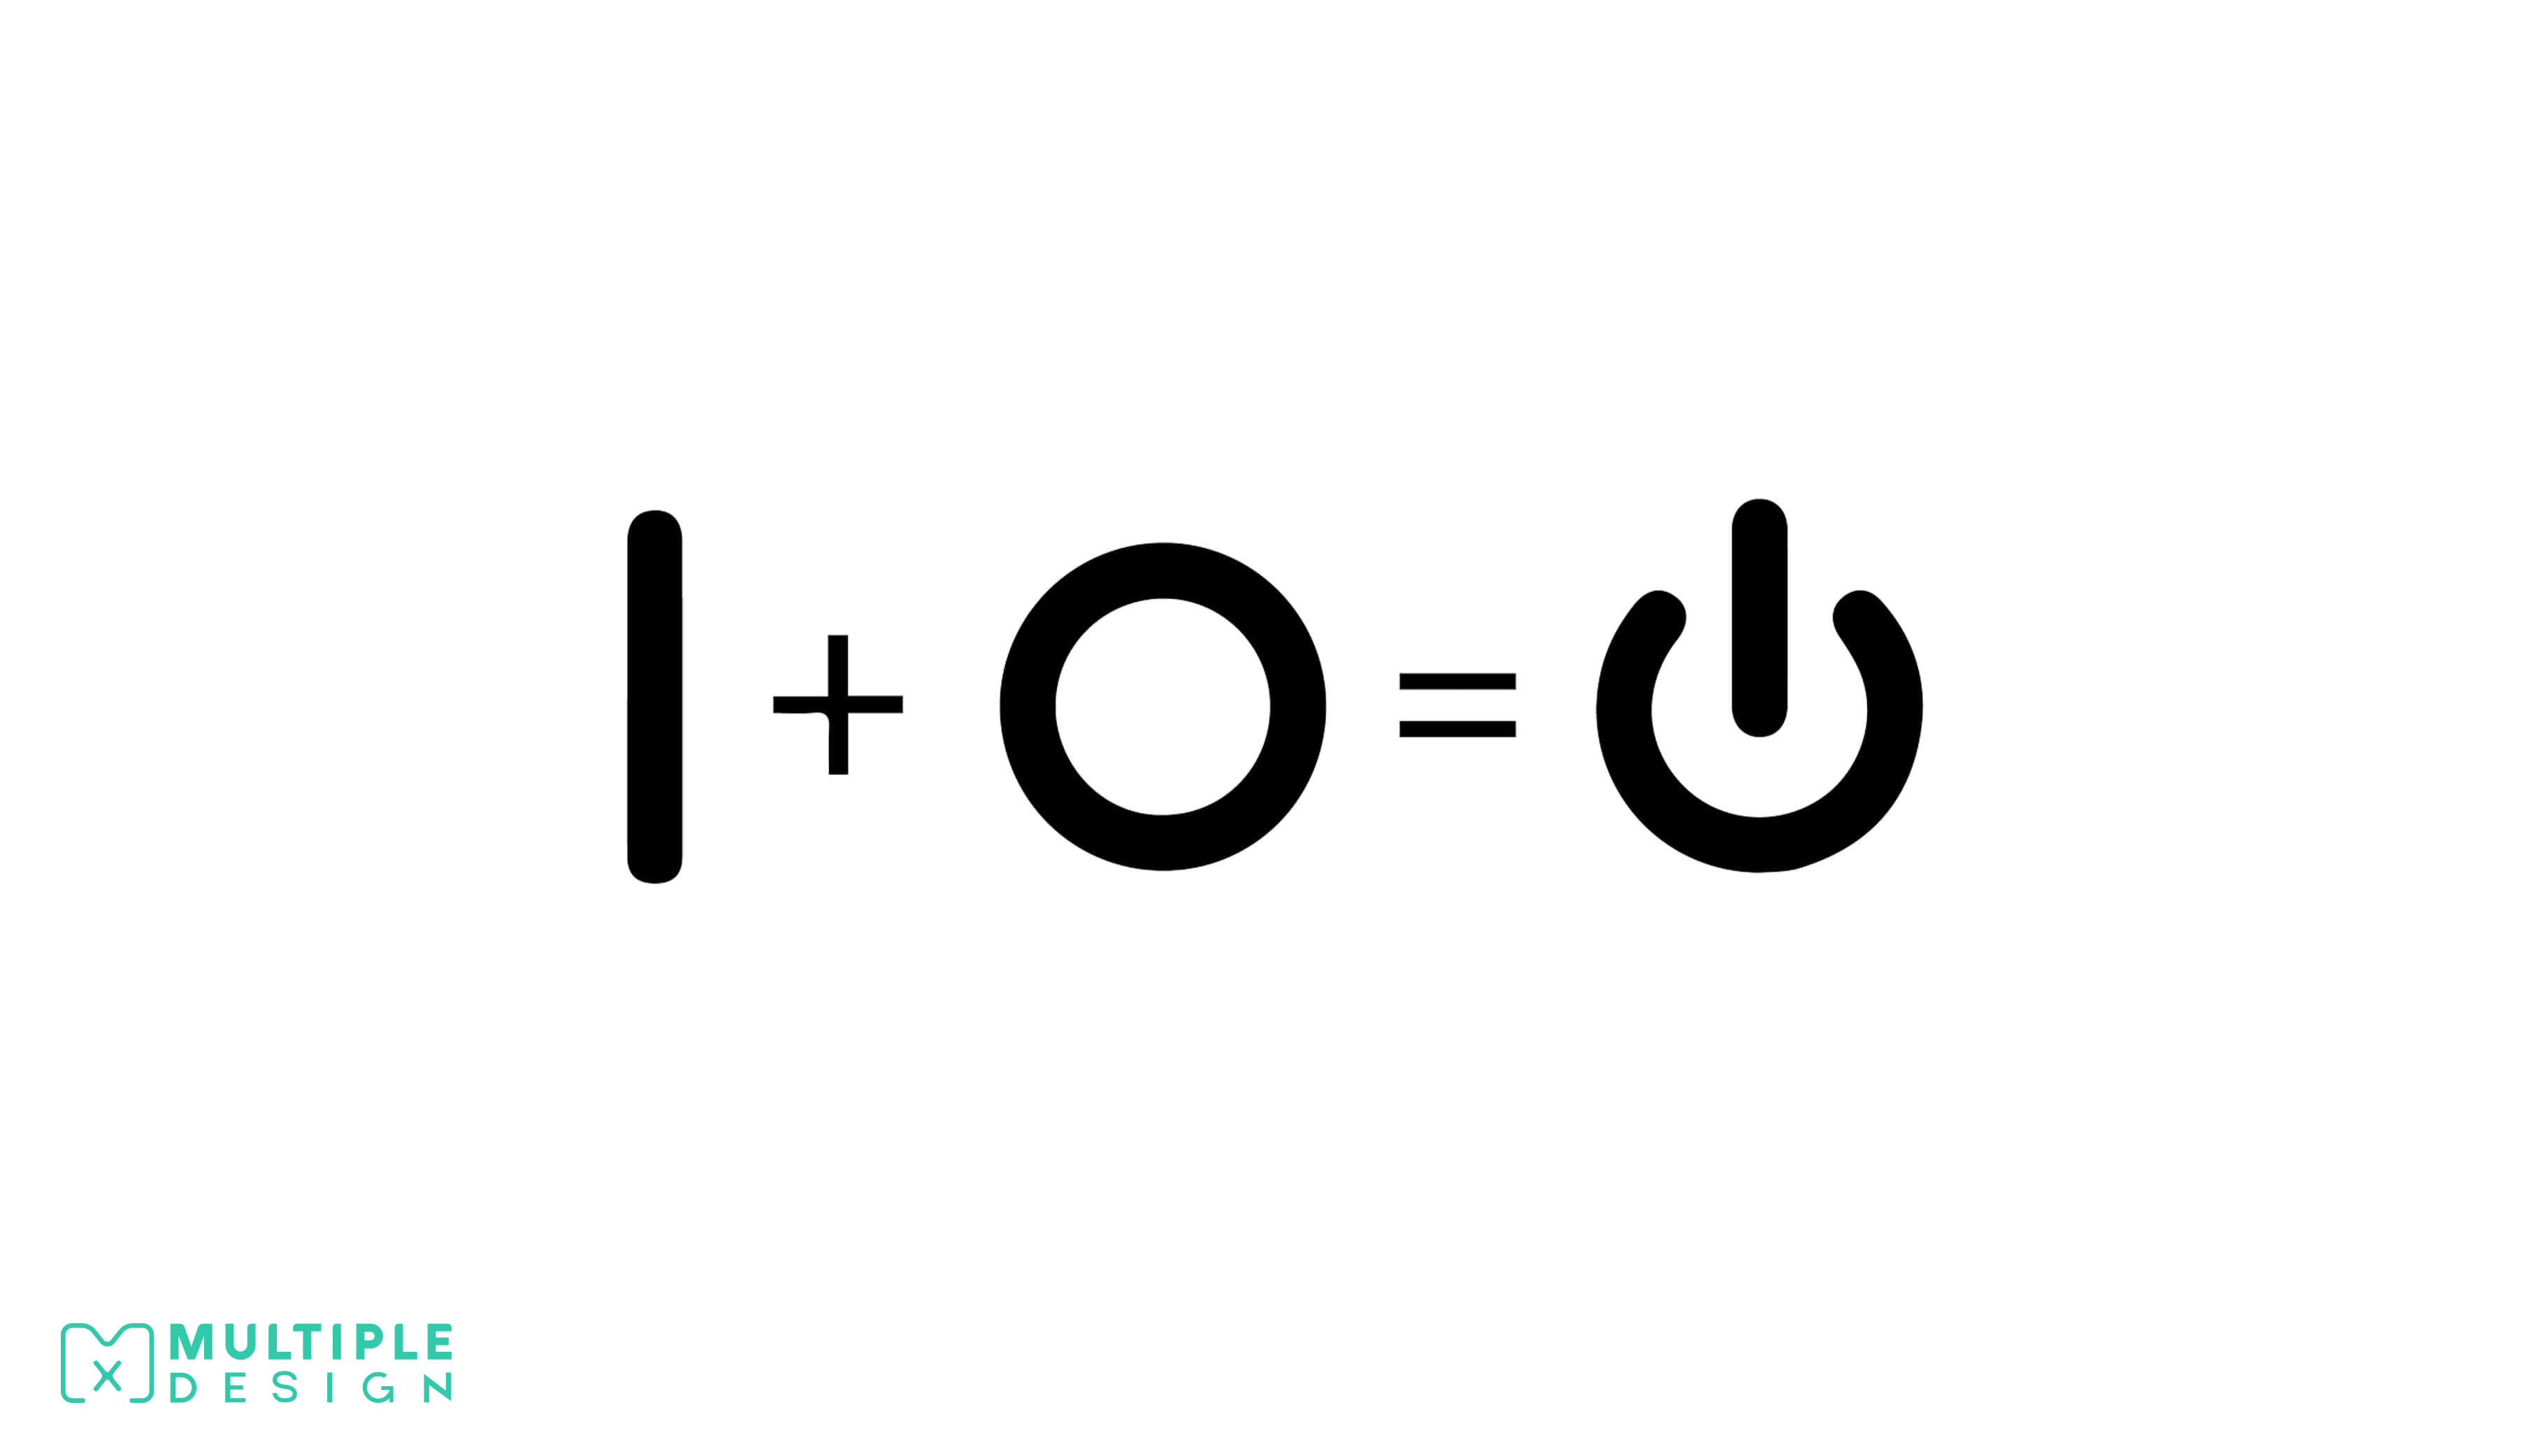 Power On/Off Symbol 1 and 0